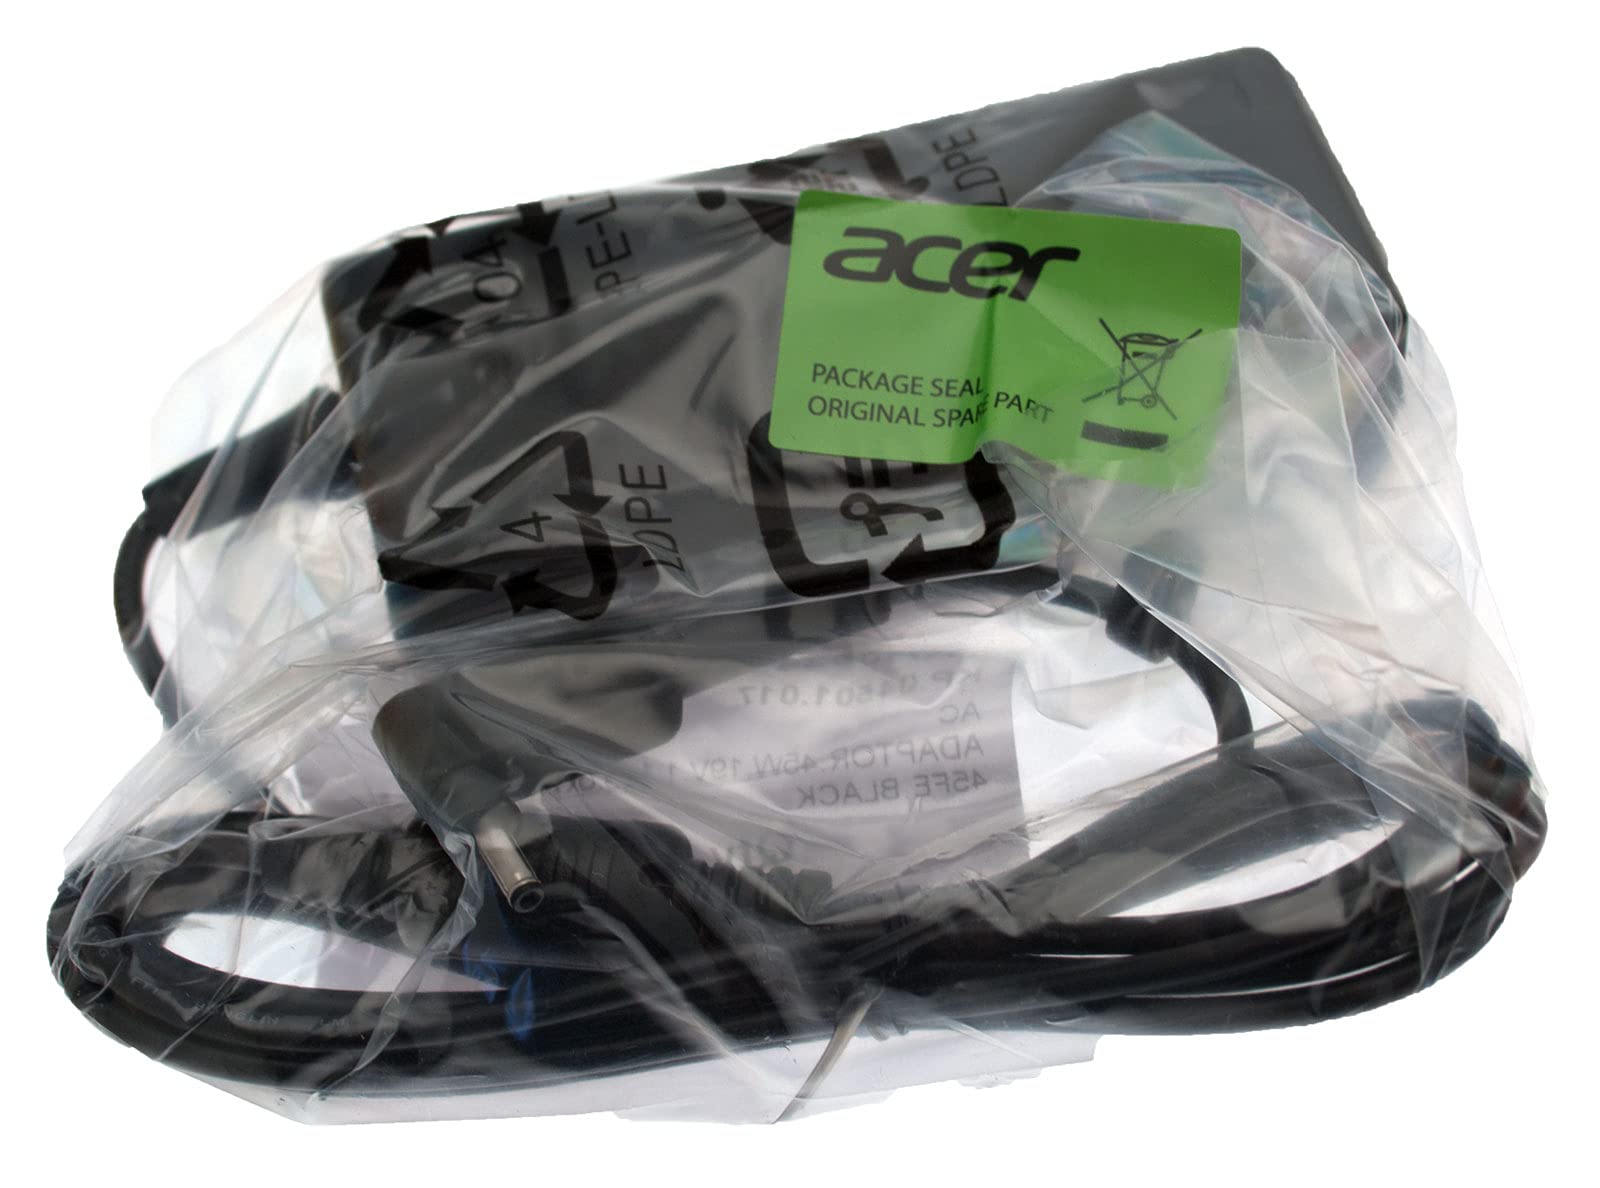 Acer KP.0450H.001 - AC Adapter 19V 45W Includes Power Cable (12 Warranty)